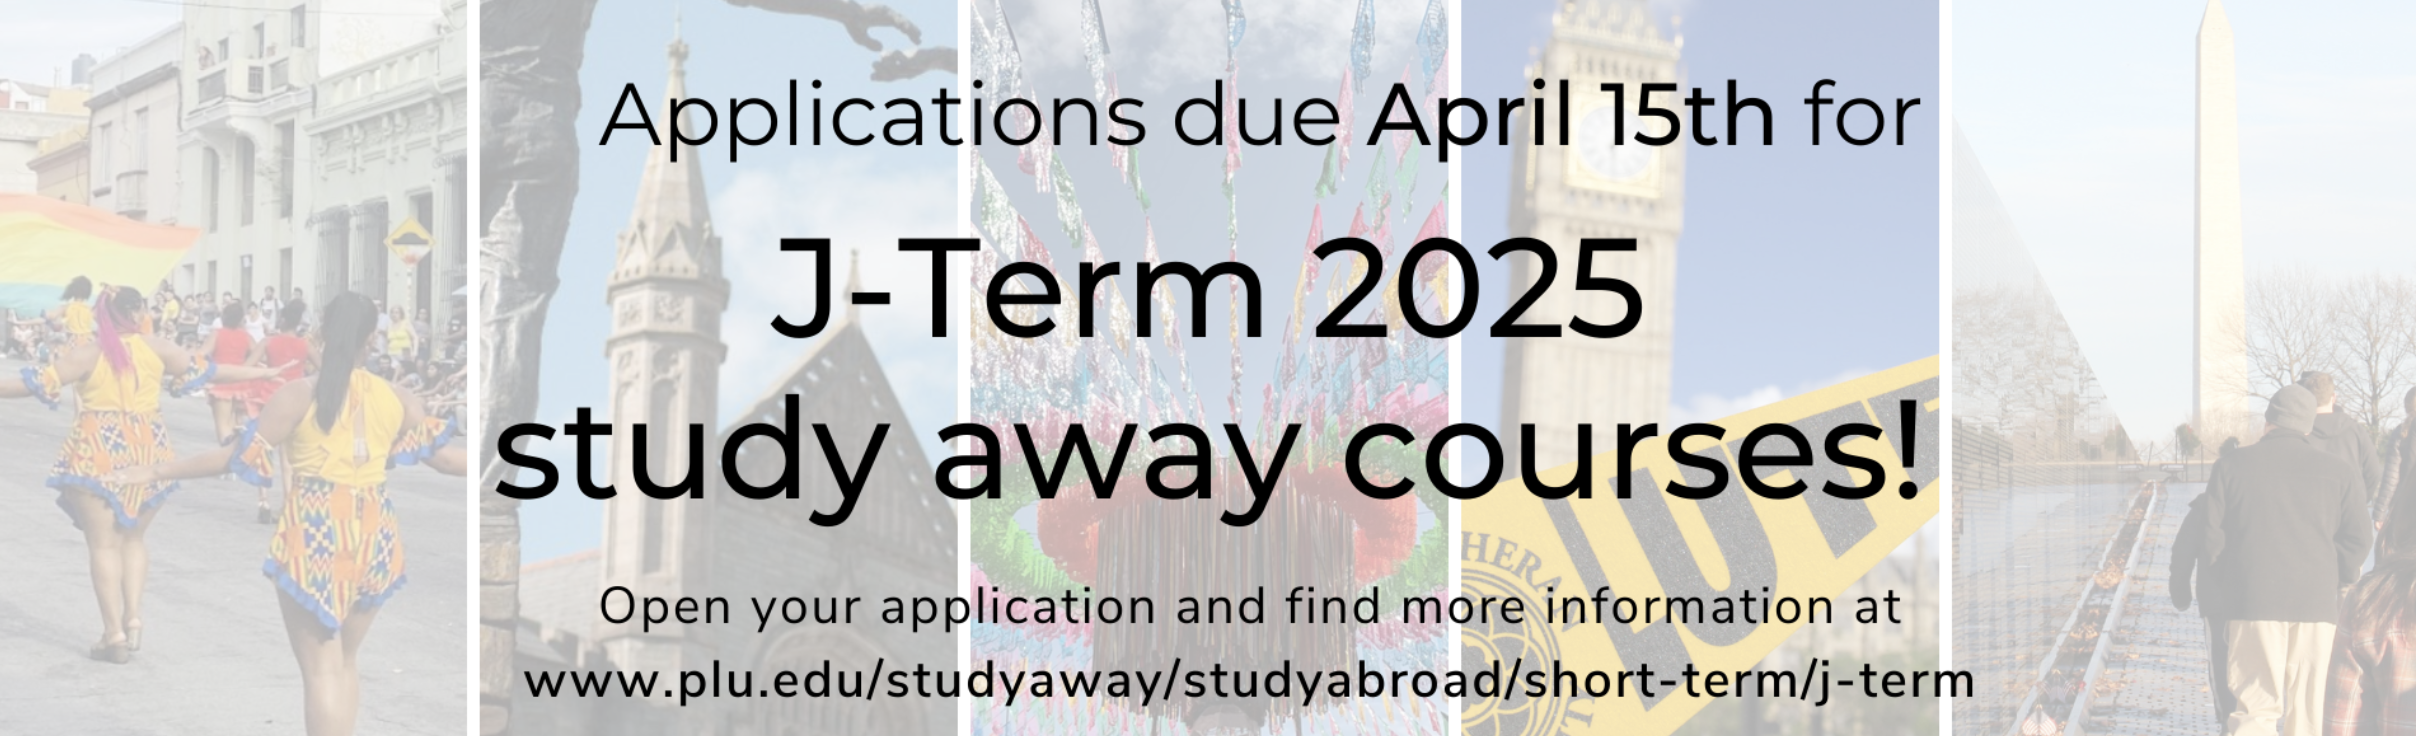 Applications due April 15 for J-Term 2025 Study away courses